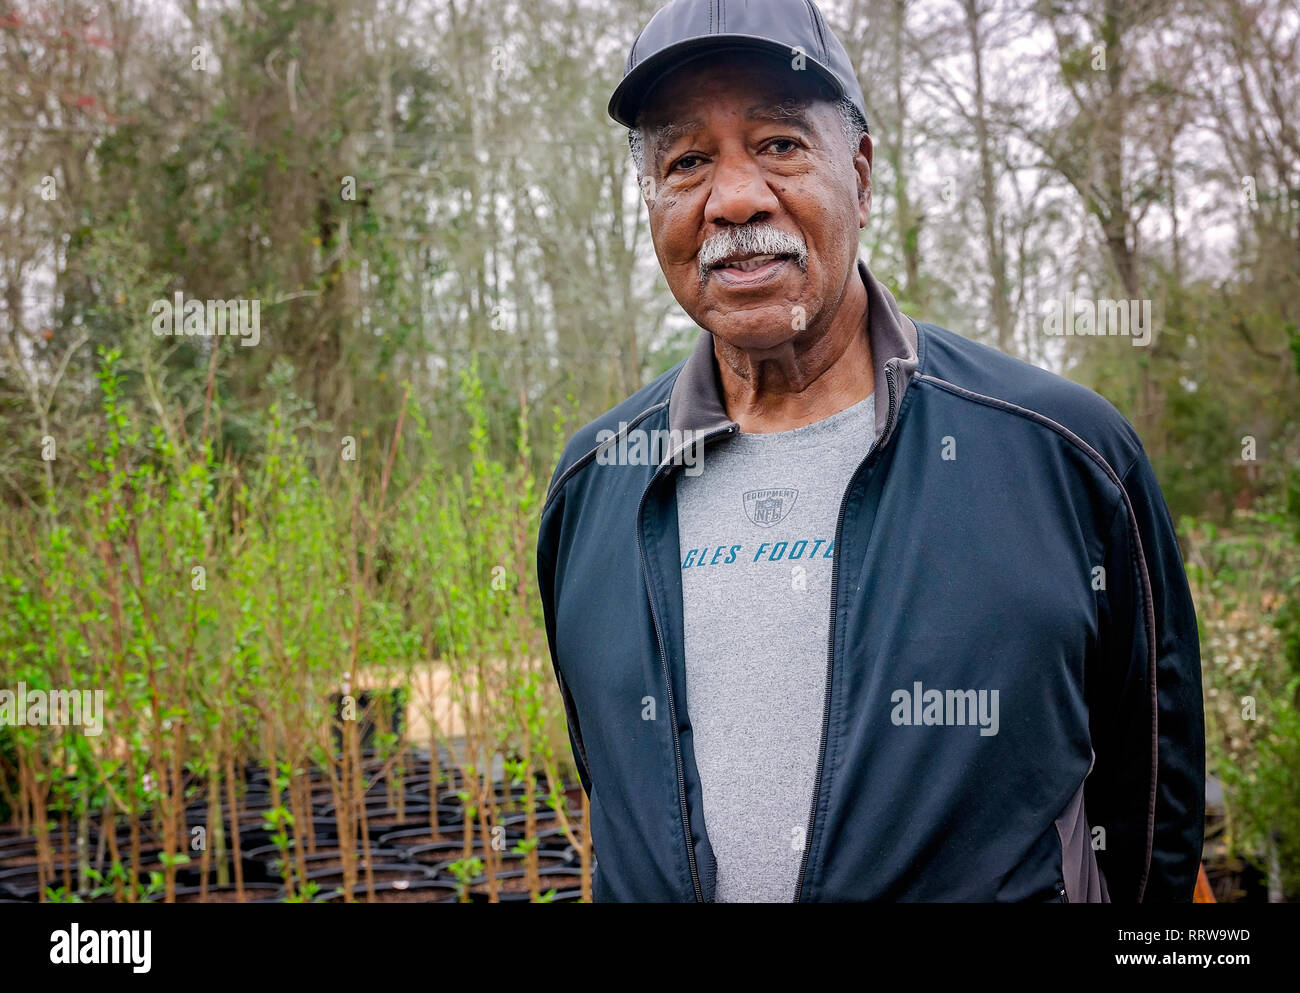 New York Mets Hall of Famer Cleon Jones poses for a photo at Shore Acres Plant Farm, Feb. 19, 2019, in Theodore, Alabama. Stock Photo